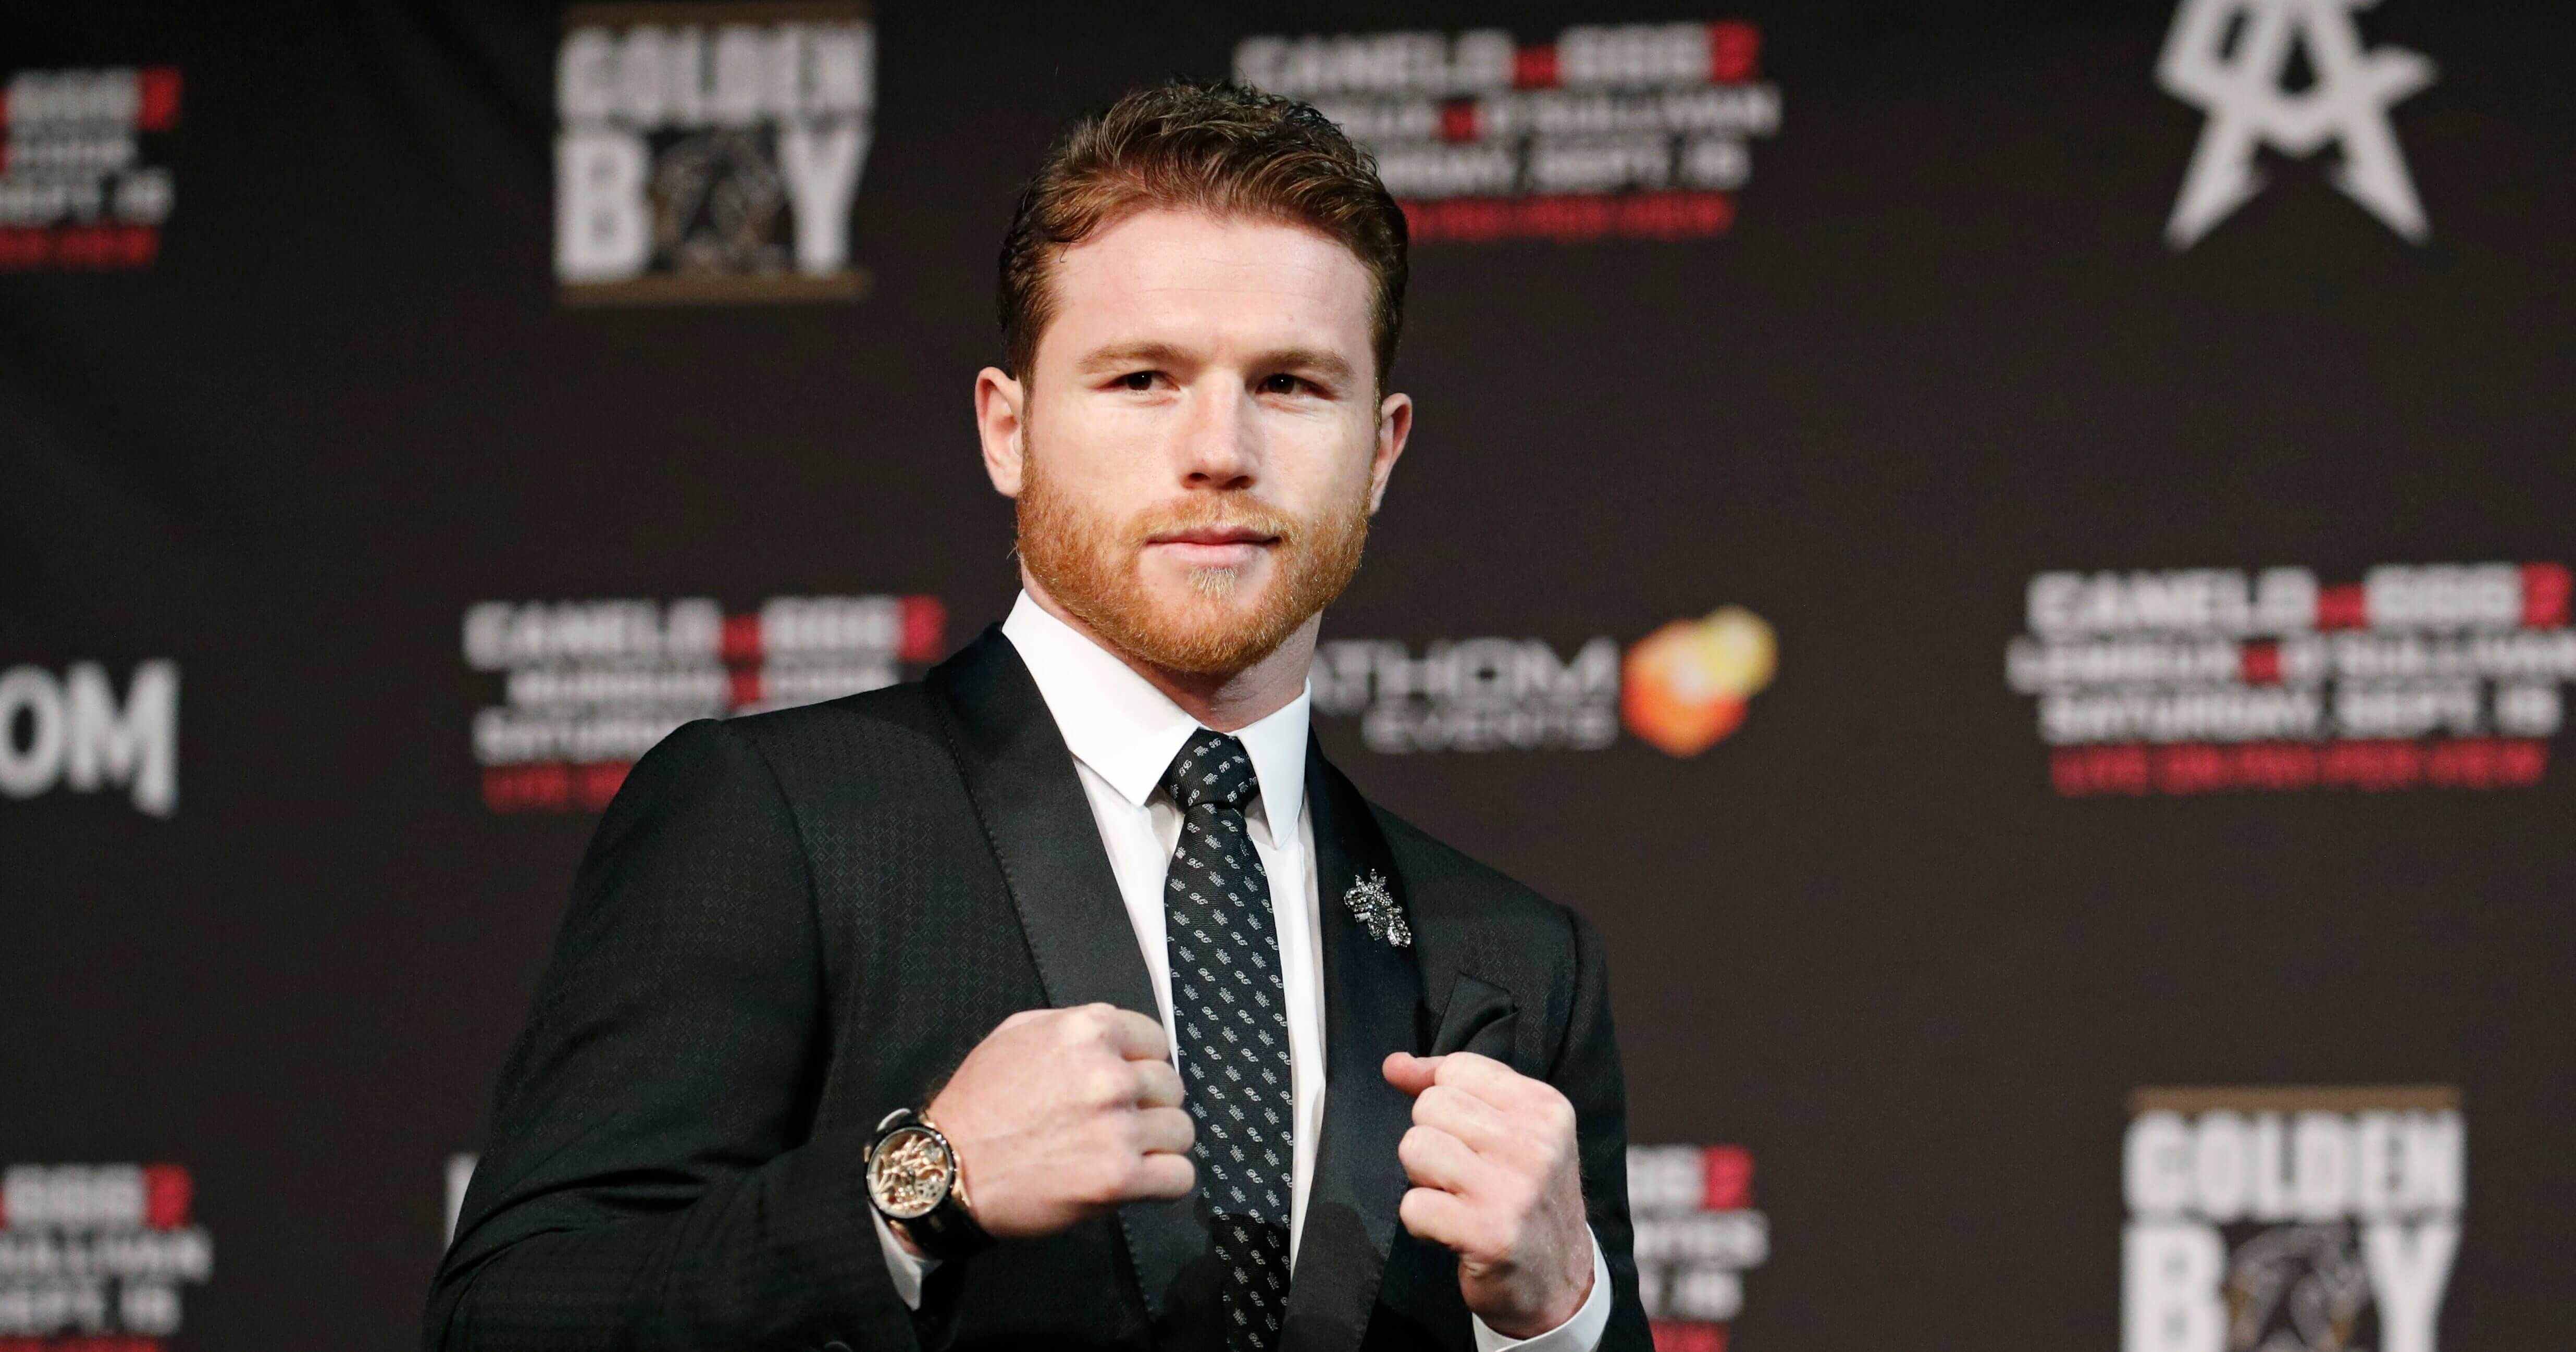 Canelo Alvarez poses during a news conference Wednesday in Las Vegas. Alvarez is scheduled to fight Gennady Golovkin in a title bout Saturday in Las Vegas.